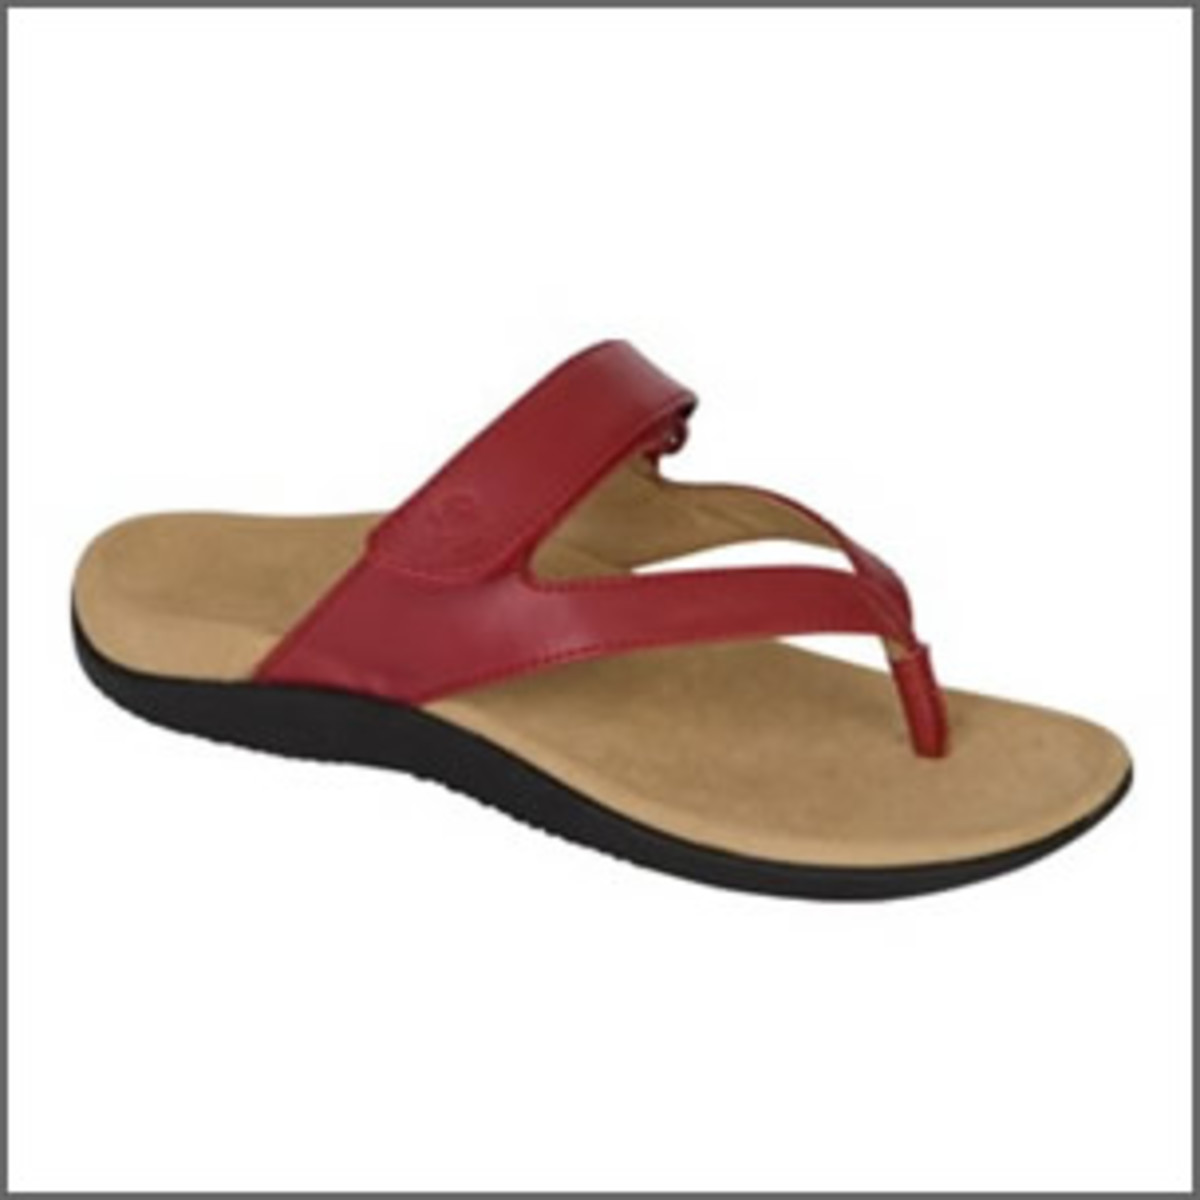 Scholl Orthaheel Sandals for Women | hubpages